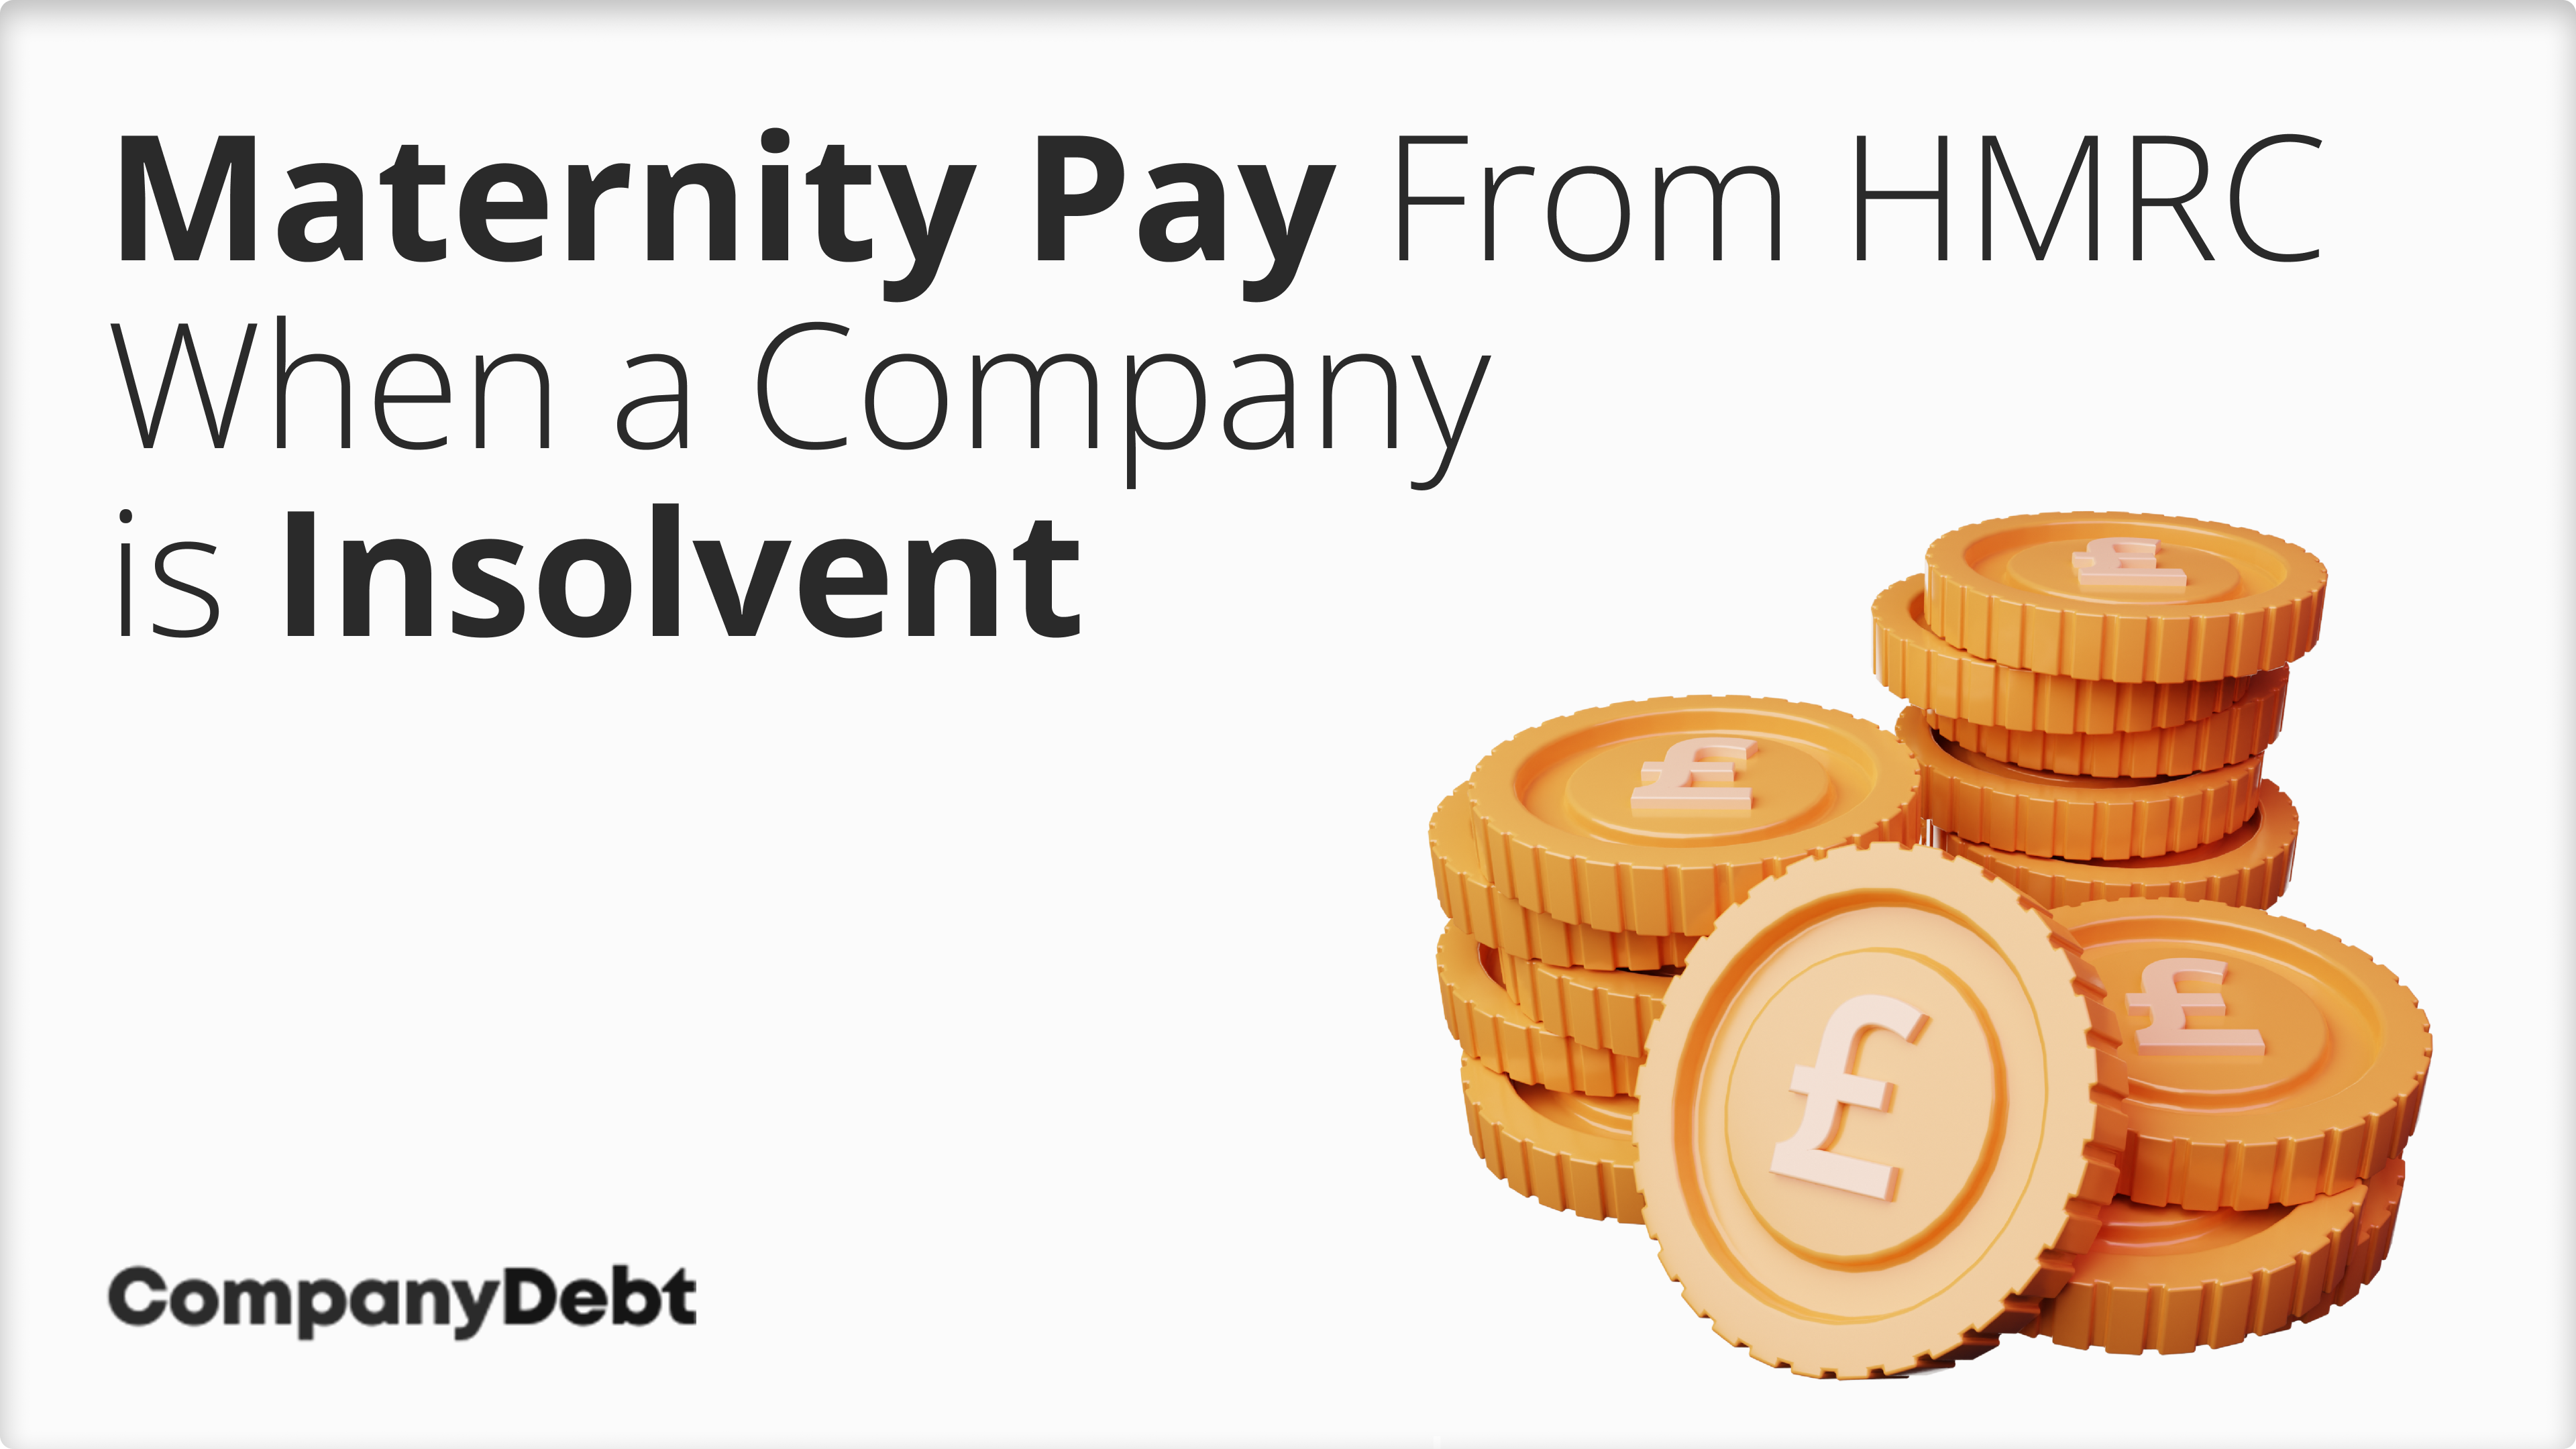 Are Employees Able to Receive Maternity pay from HMRC when a Company is Insolvent?